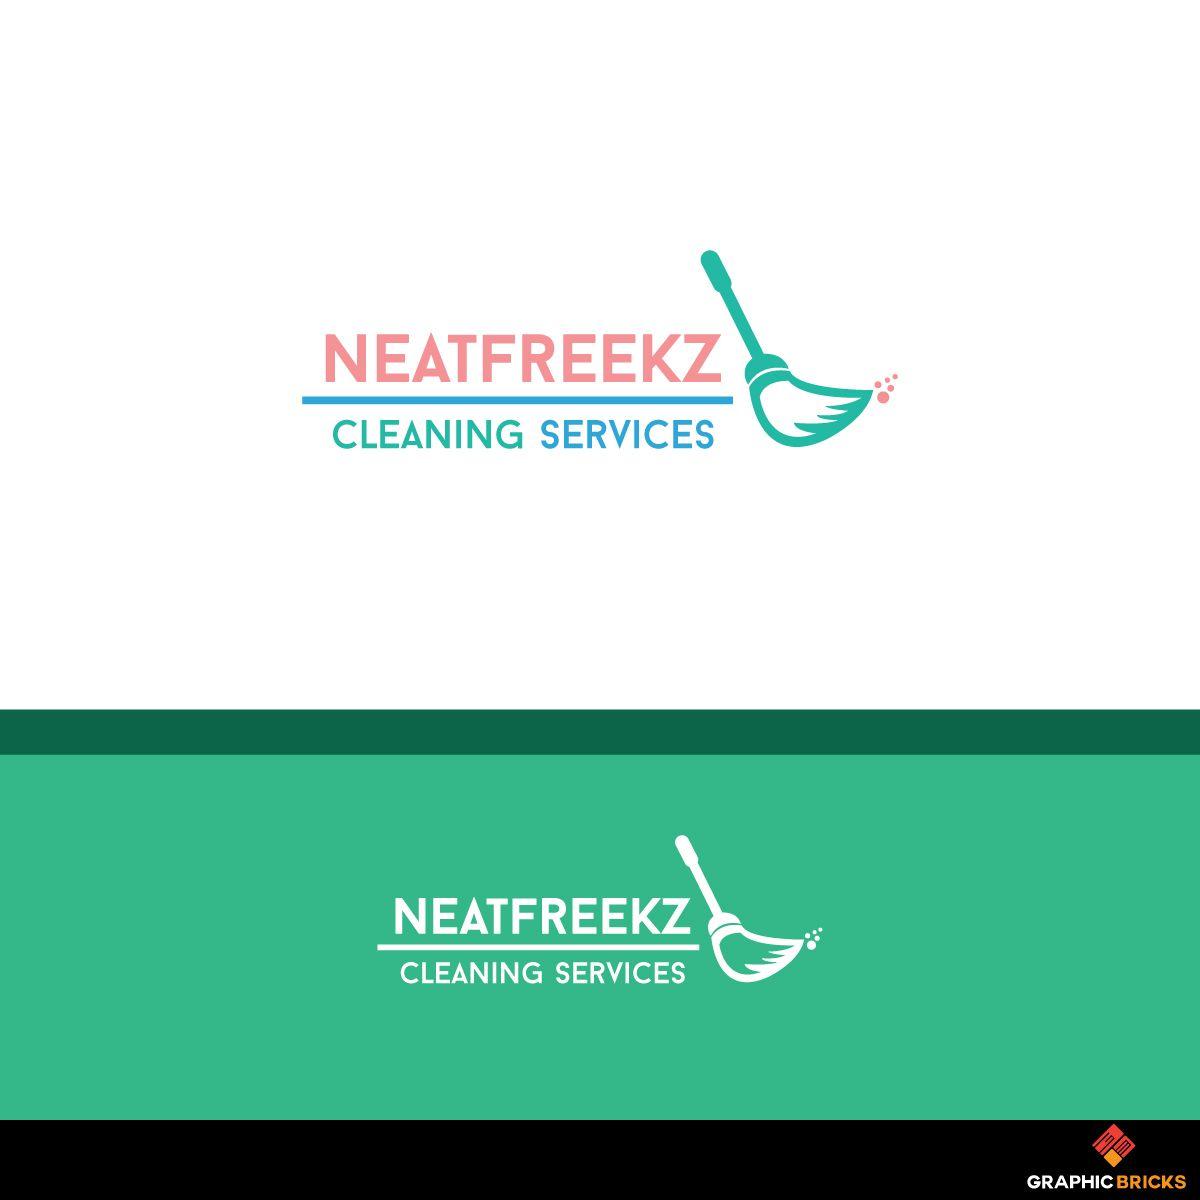 Neat Logo - Modern, Bold, Office Cleaning Logo Design for Neat Freekz Cleaning ...